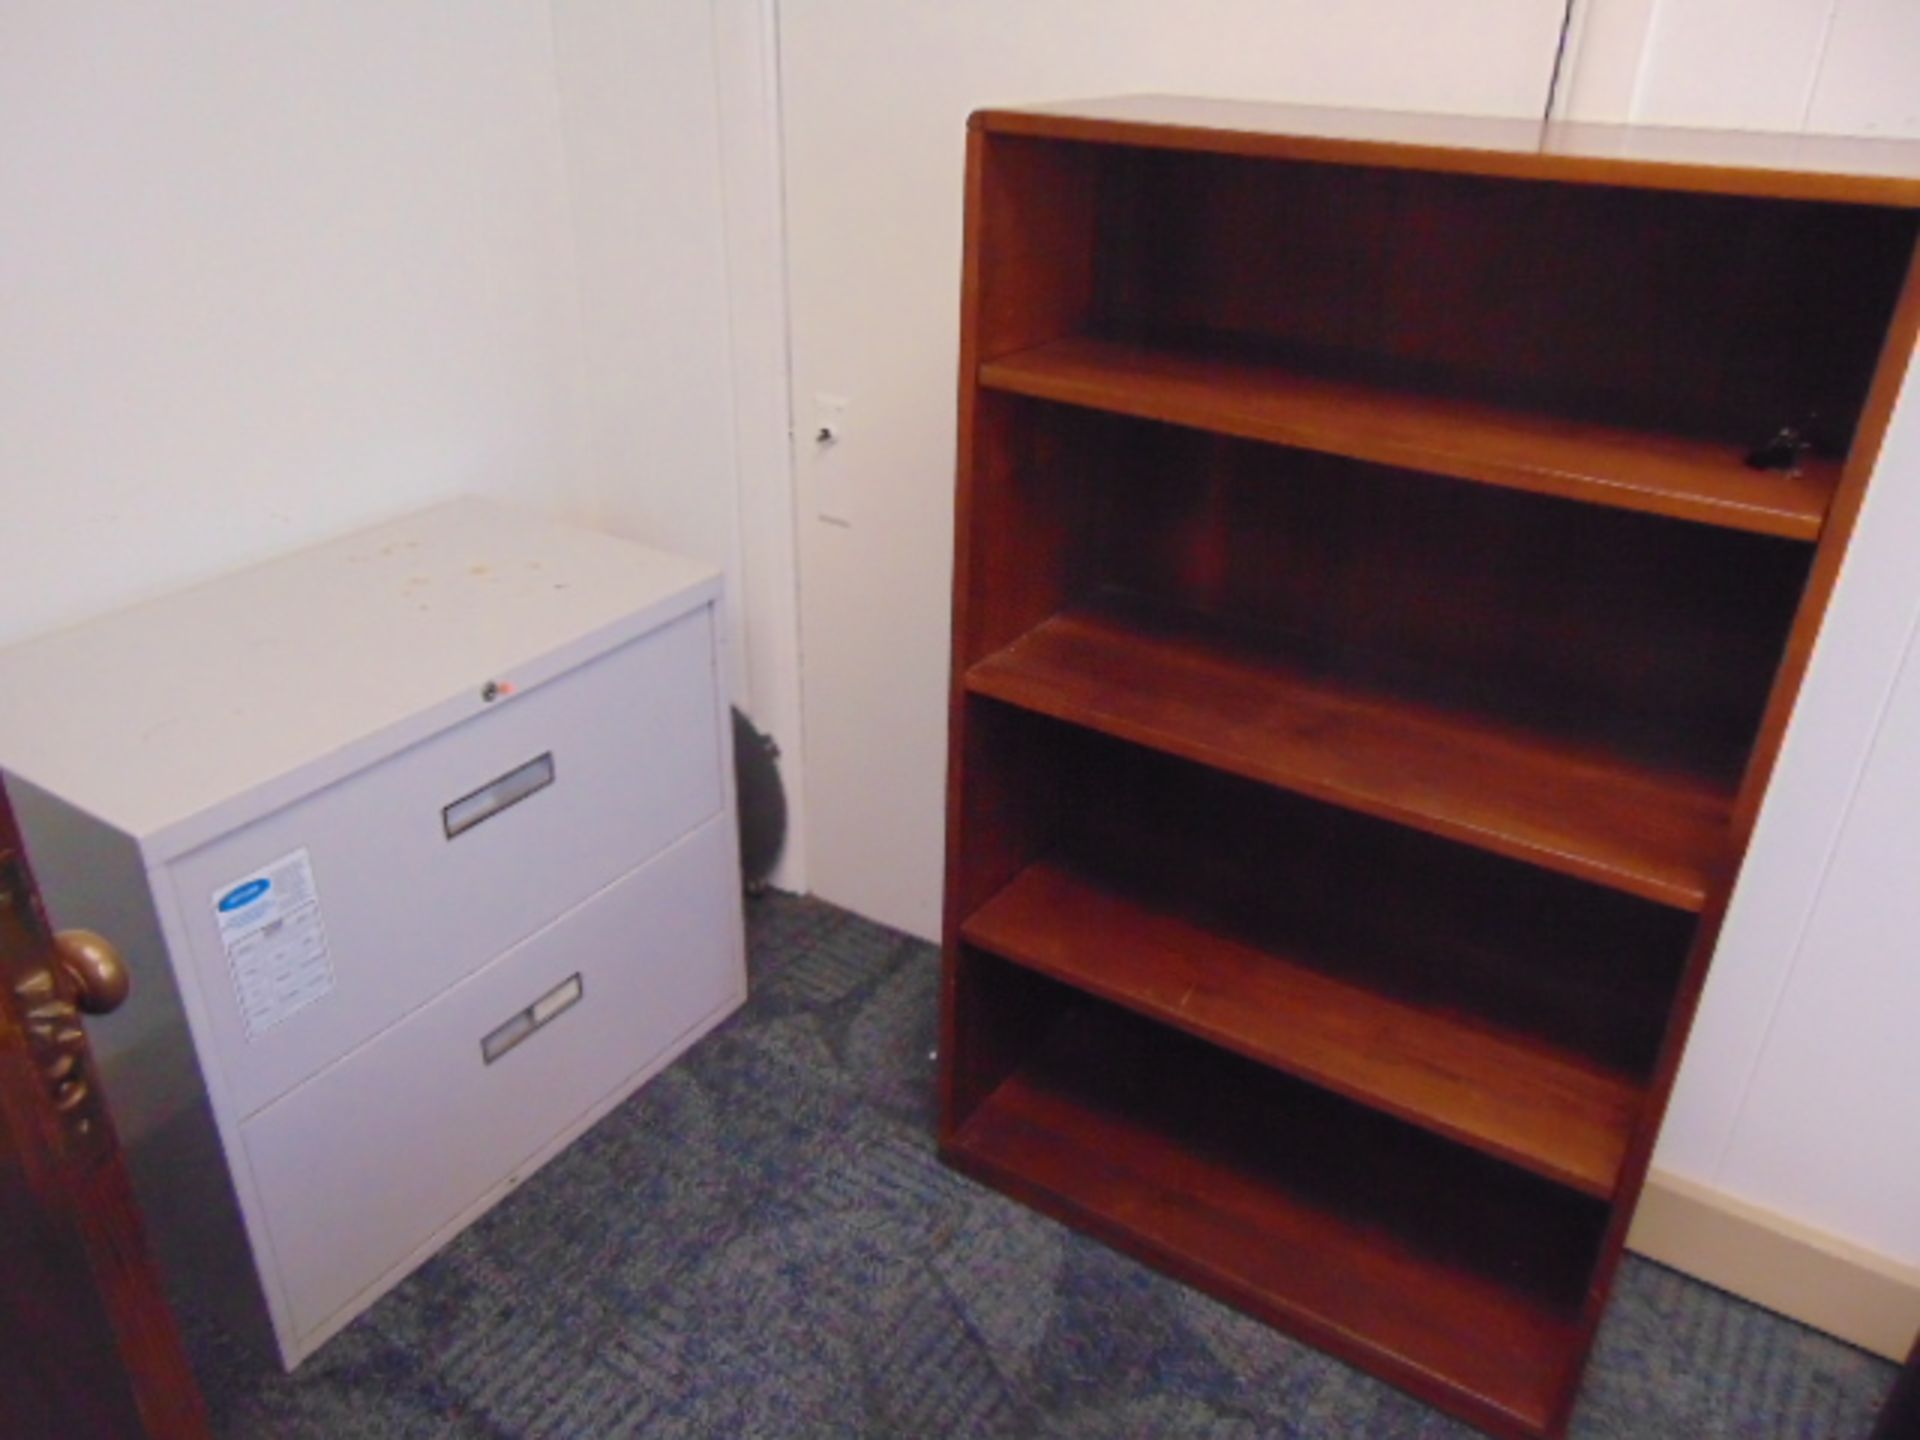 LOT CONSISTING OF: desk, table, credenza, chair & (3) bookcases - Image 3 of 3